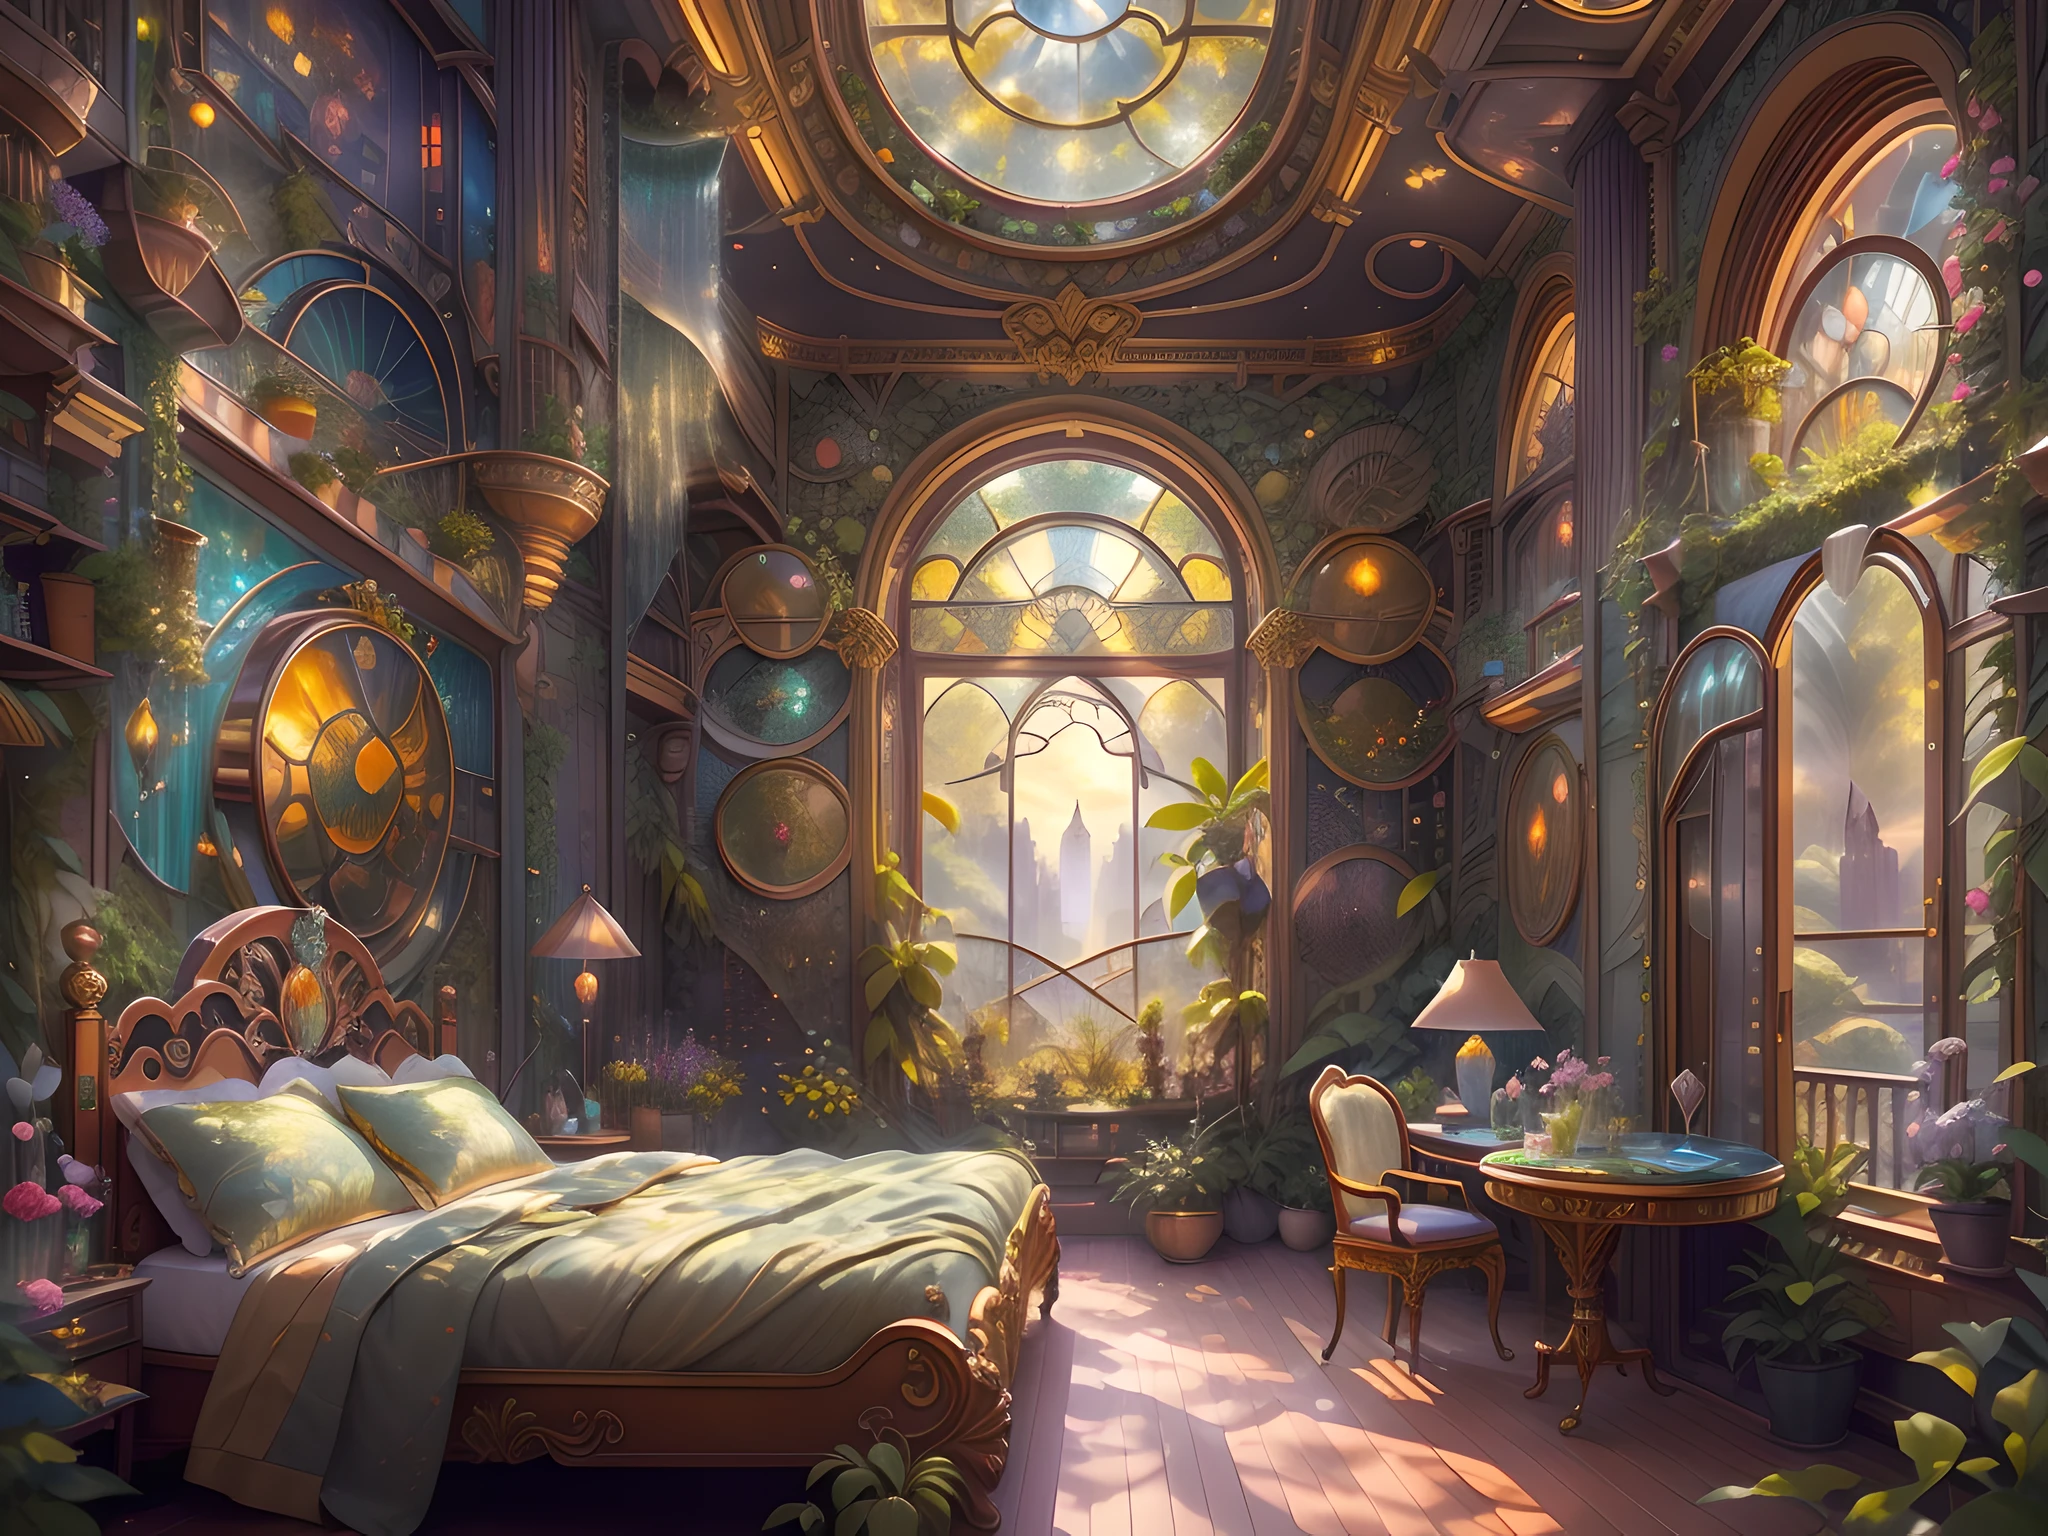 Title: "Solarpunk Dreamscape: The Royal Botanical Sanctuary" | This ornate botanical bedroom, inspired by the opulence of Versailles, invites viewers to immerse themselves in a world of wonders. (((Generate an ornate solarpunk and botanical elegant bedroom in the style of Versailles with a grand historical window.))) The grand historical window, adorned with intricate carvings, dominates one wall. Through the colossal window, a bustling solarpunk dreamscape cityscape unfolds. The cityscape is a marvel of breathtaking complexity - a futuristic metropolis that glimmers with countless colors and buildings of various sizes, an awe-inspiring testament to human creativity and architectural prowess. The solarpunk dreamscape cityscape is a symphony of vibrant colors, reminiscent of a utopian paradise. The buildings stretch into the sky, each one featuring imaginative solarpunk details - rooftop gardens adorned with lush greenery, cascading waterfalls powered by sustainable energy, and whimsical elements that spark the imagination. This high-resolution, 3D-rendered cityscape is a masterpiece of digital art, seamlessly blending the worlds of fantasy and sci-fi. In this fantastical dreamscape, beauty is found in the subtlest of details. Delicate tendrils of ivy climb gracefully up the walls, while gentle petals from floating flowers dance through the air. Exquisite tapestries and paintings of mythical creatures adorn the walls, each telling its own enchanting story.